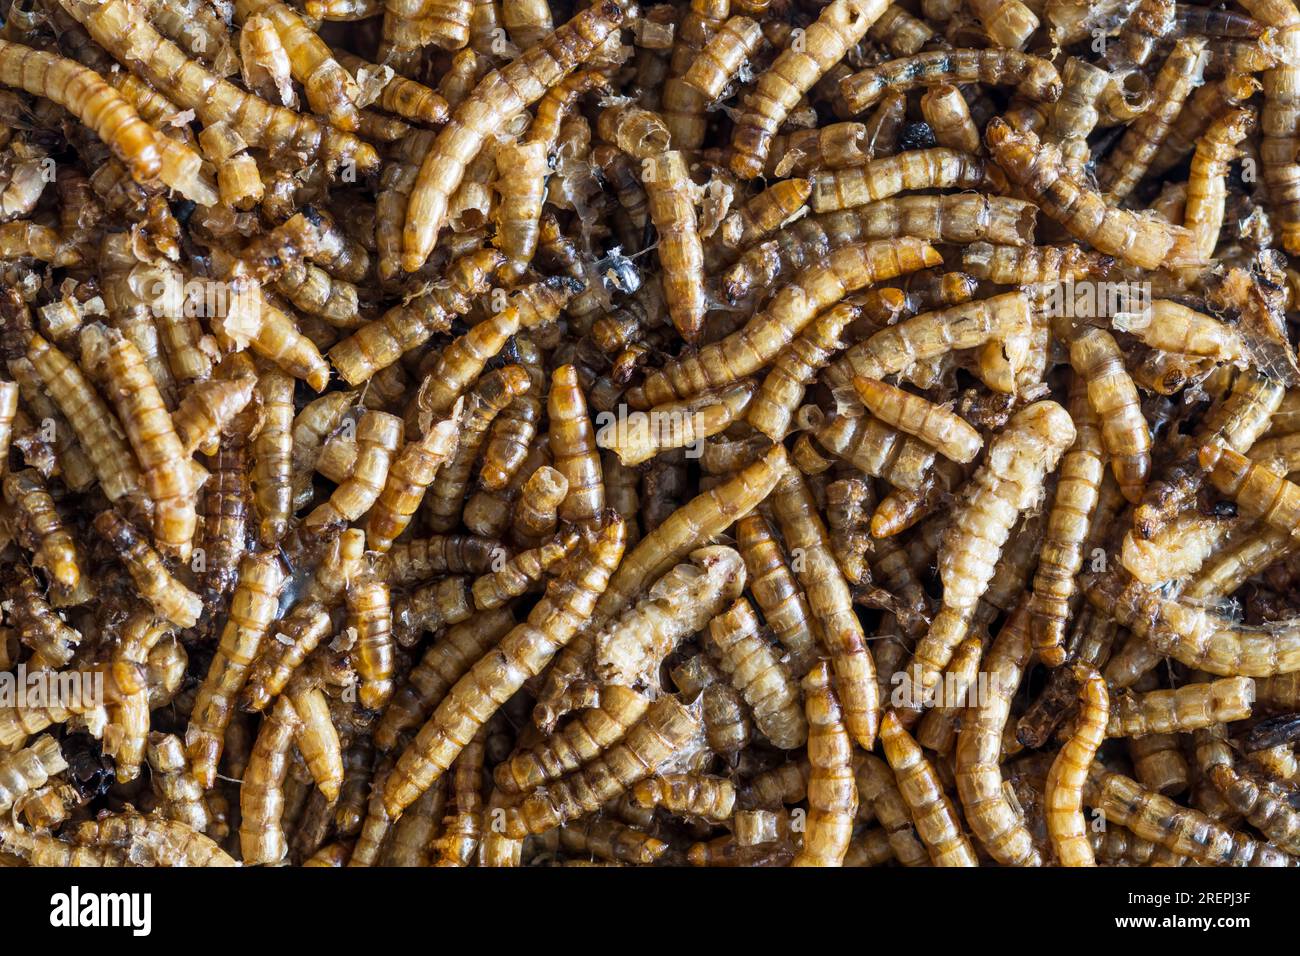 Birdfood - closeup of a mealworm block consisting of dried mealworms set in gelatine. Stock Photo